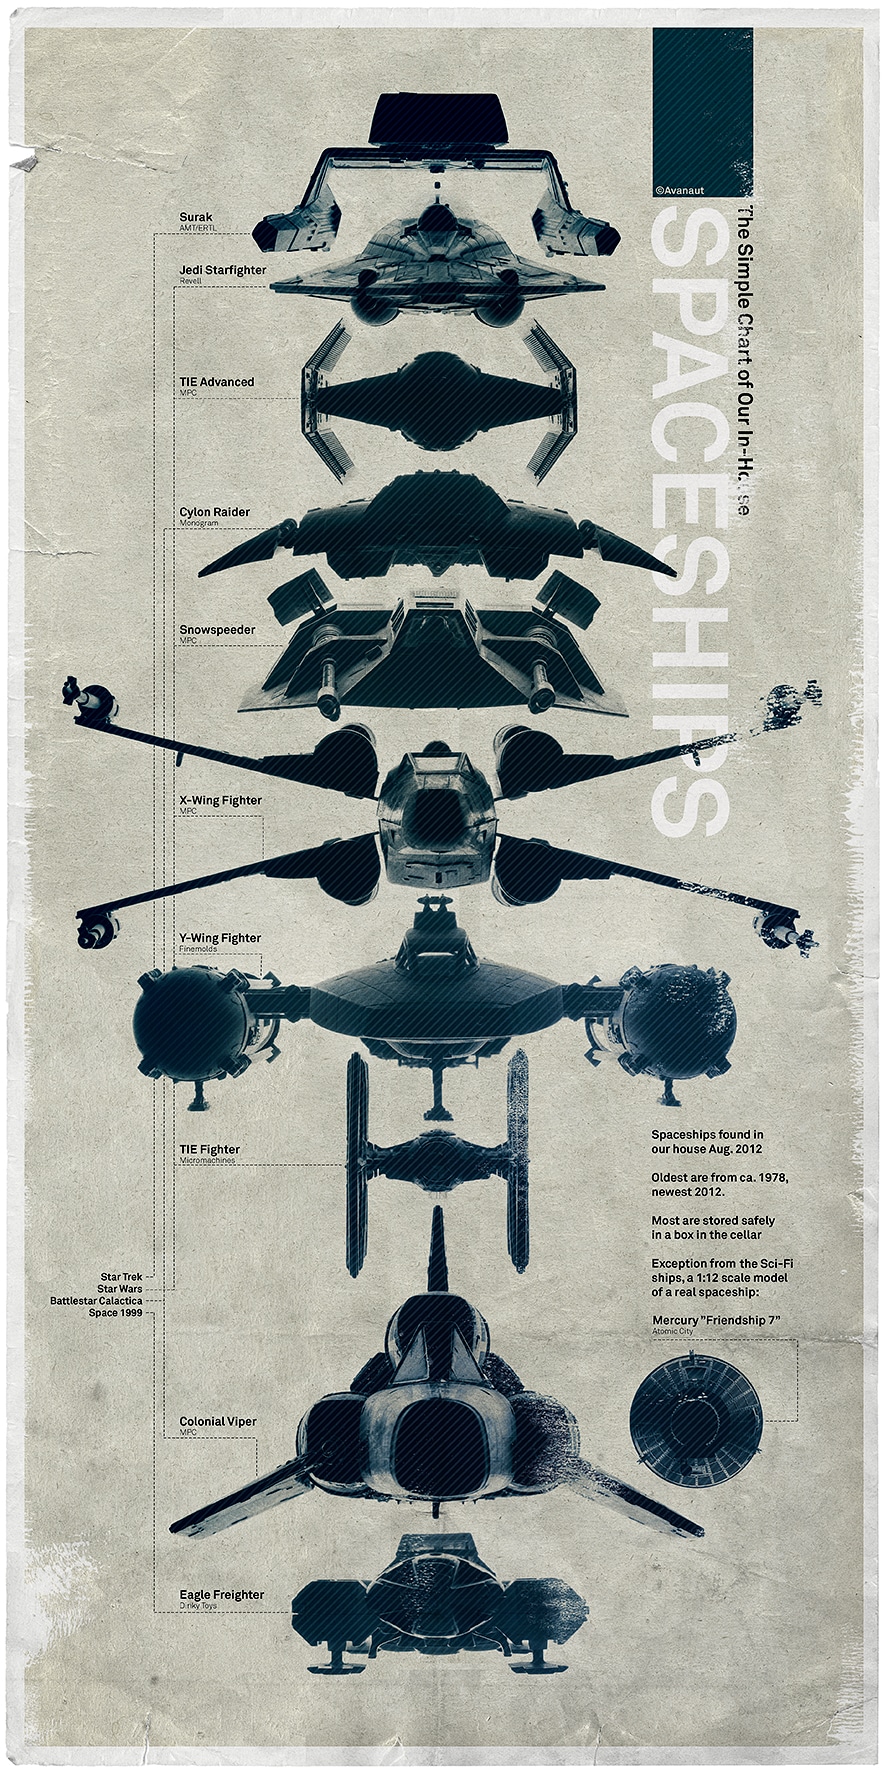 Star Wars Ships Compared In An Epically Composed Poster